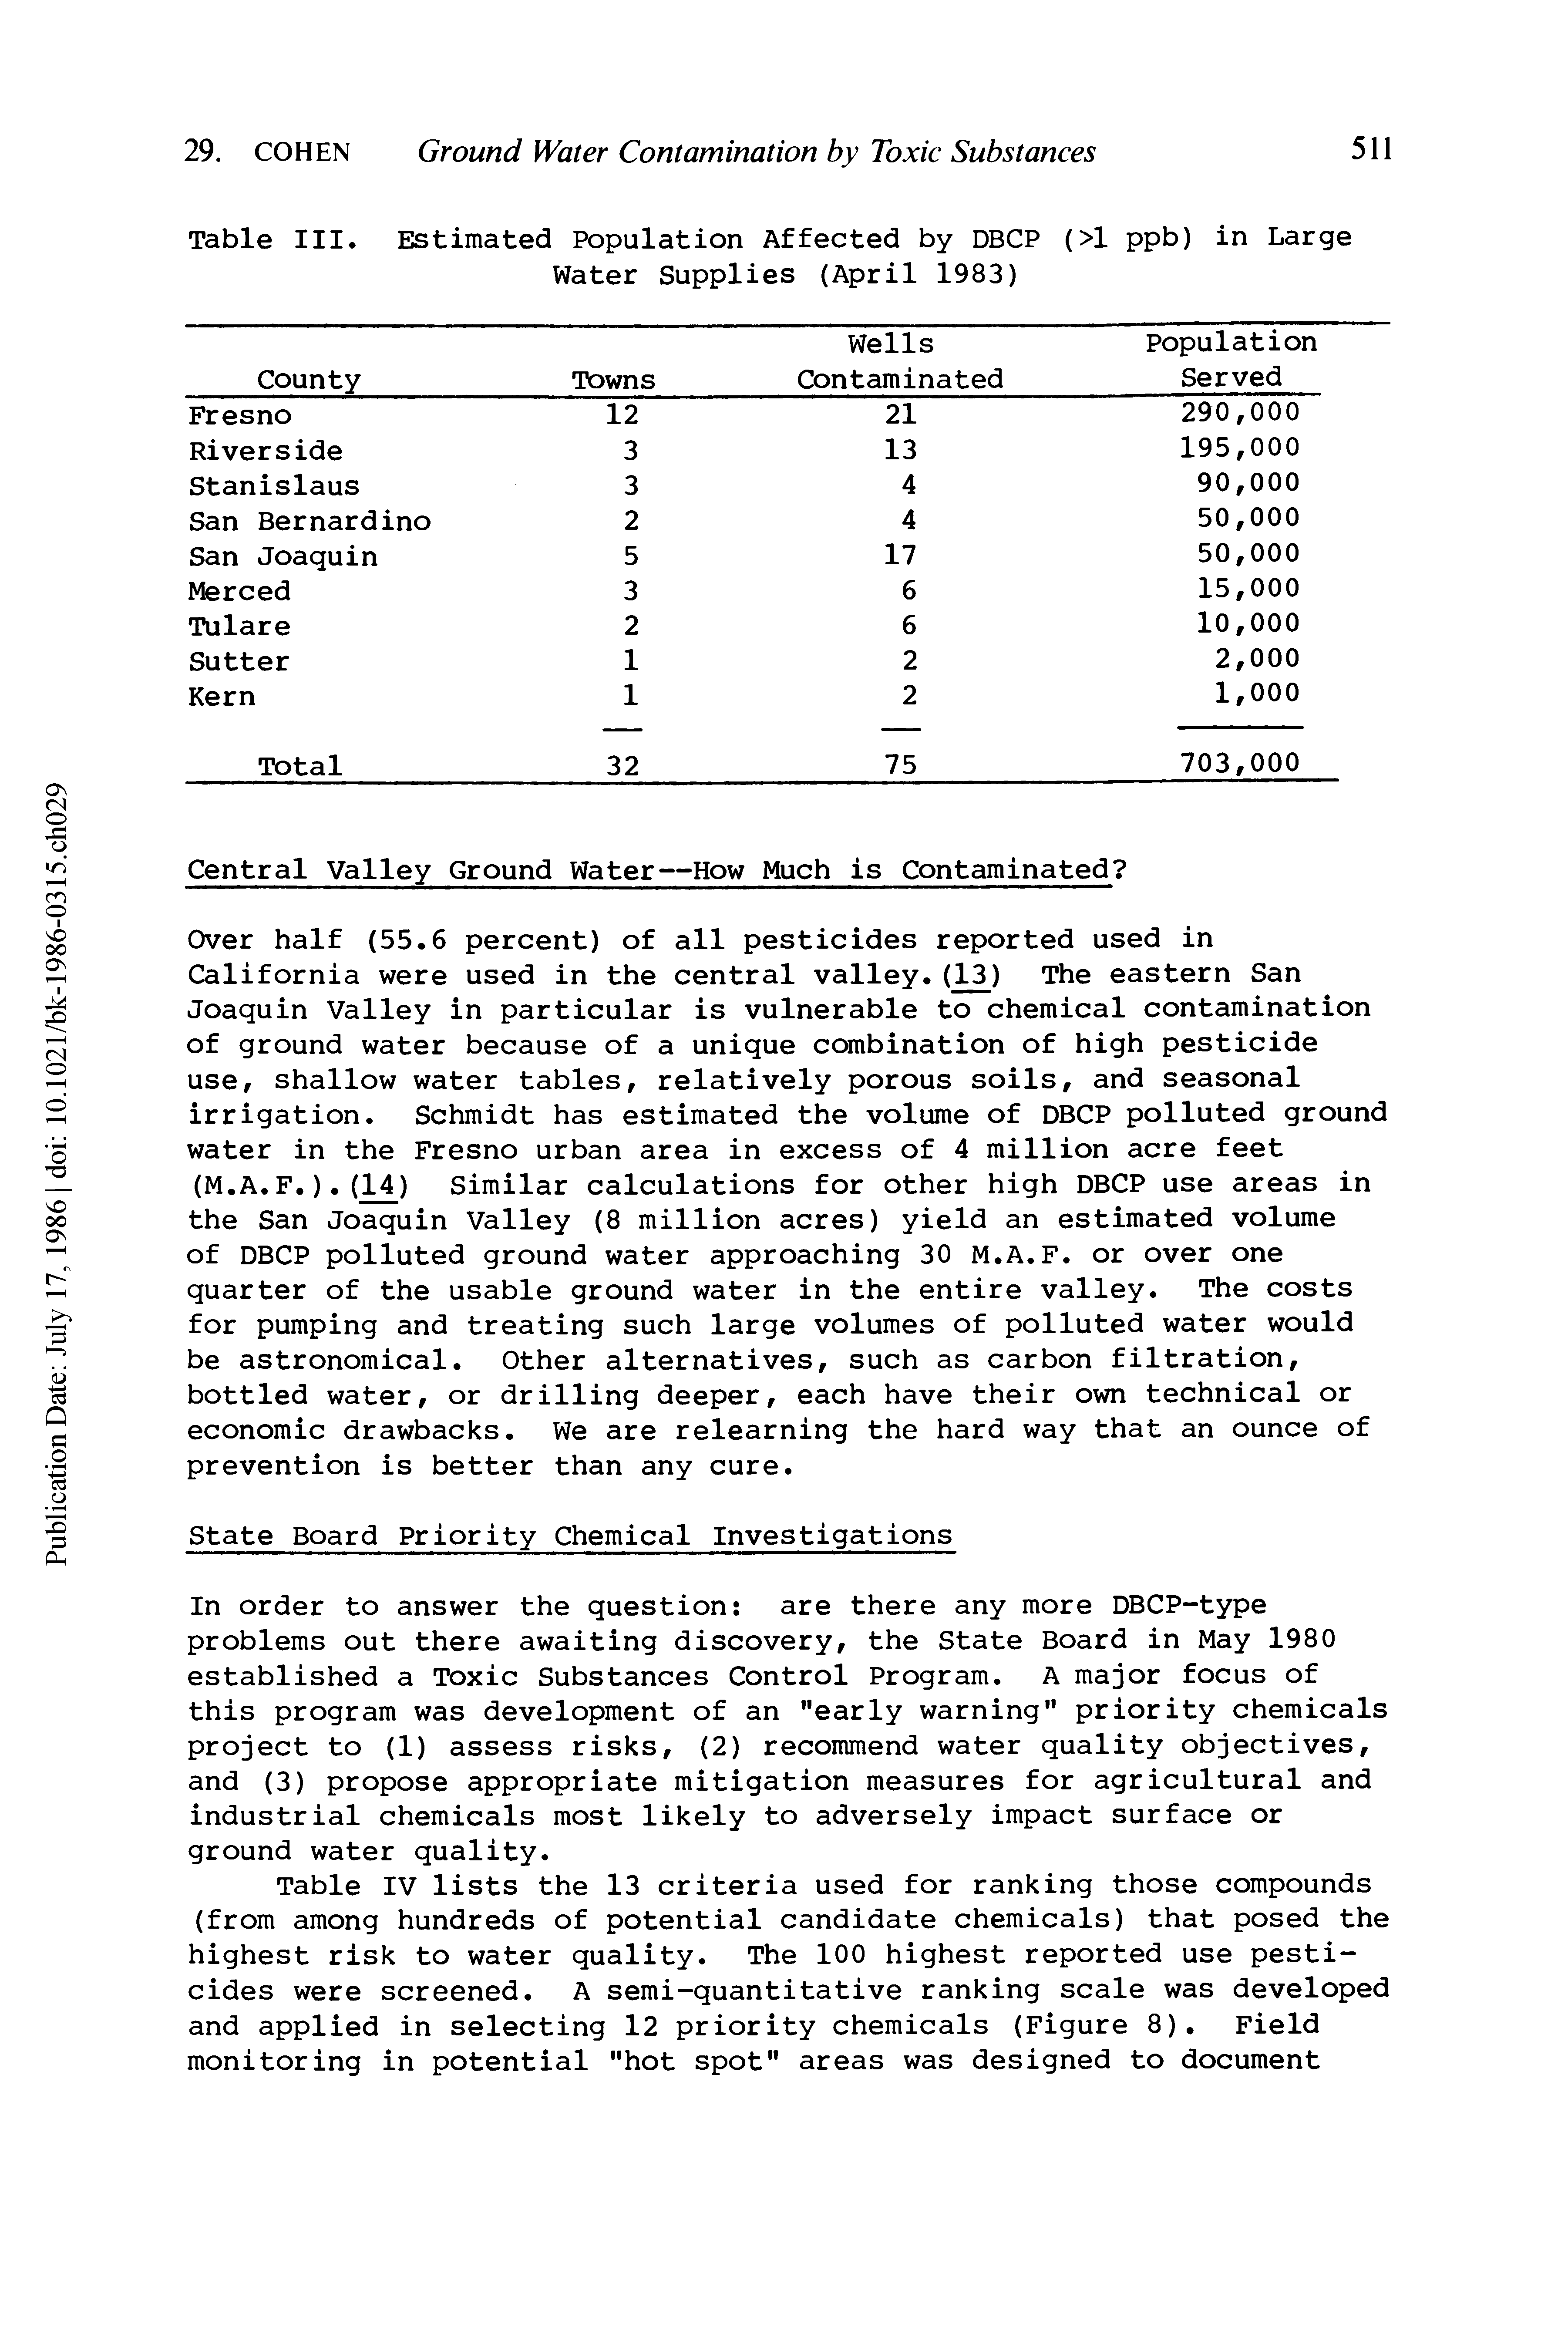 Table IV lists the 13 criteria used for ranking those compounds (from among hundreds of potential candidate chemicals) that posed the highest risk to water quality. The 100 highest reported use pesticides were screened. A semi-quantitative ranking scale was developed and applied in selecting 12 priority chemicals (Figure 8). Field monitoring in potential "hot spot" areas was designed to document...